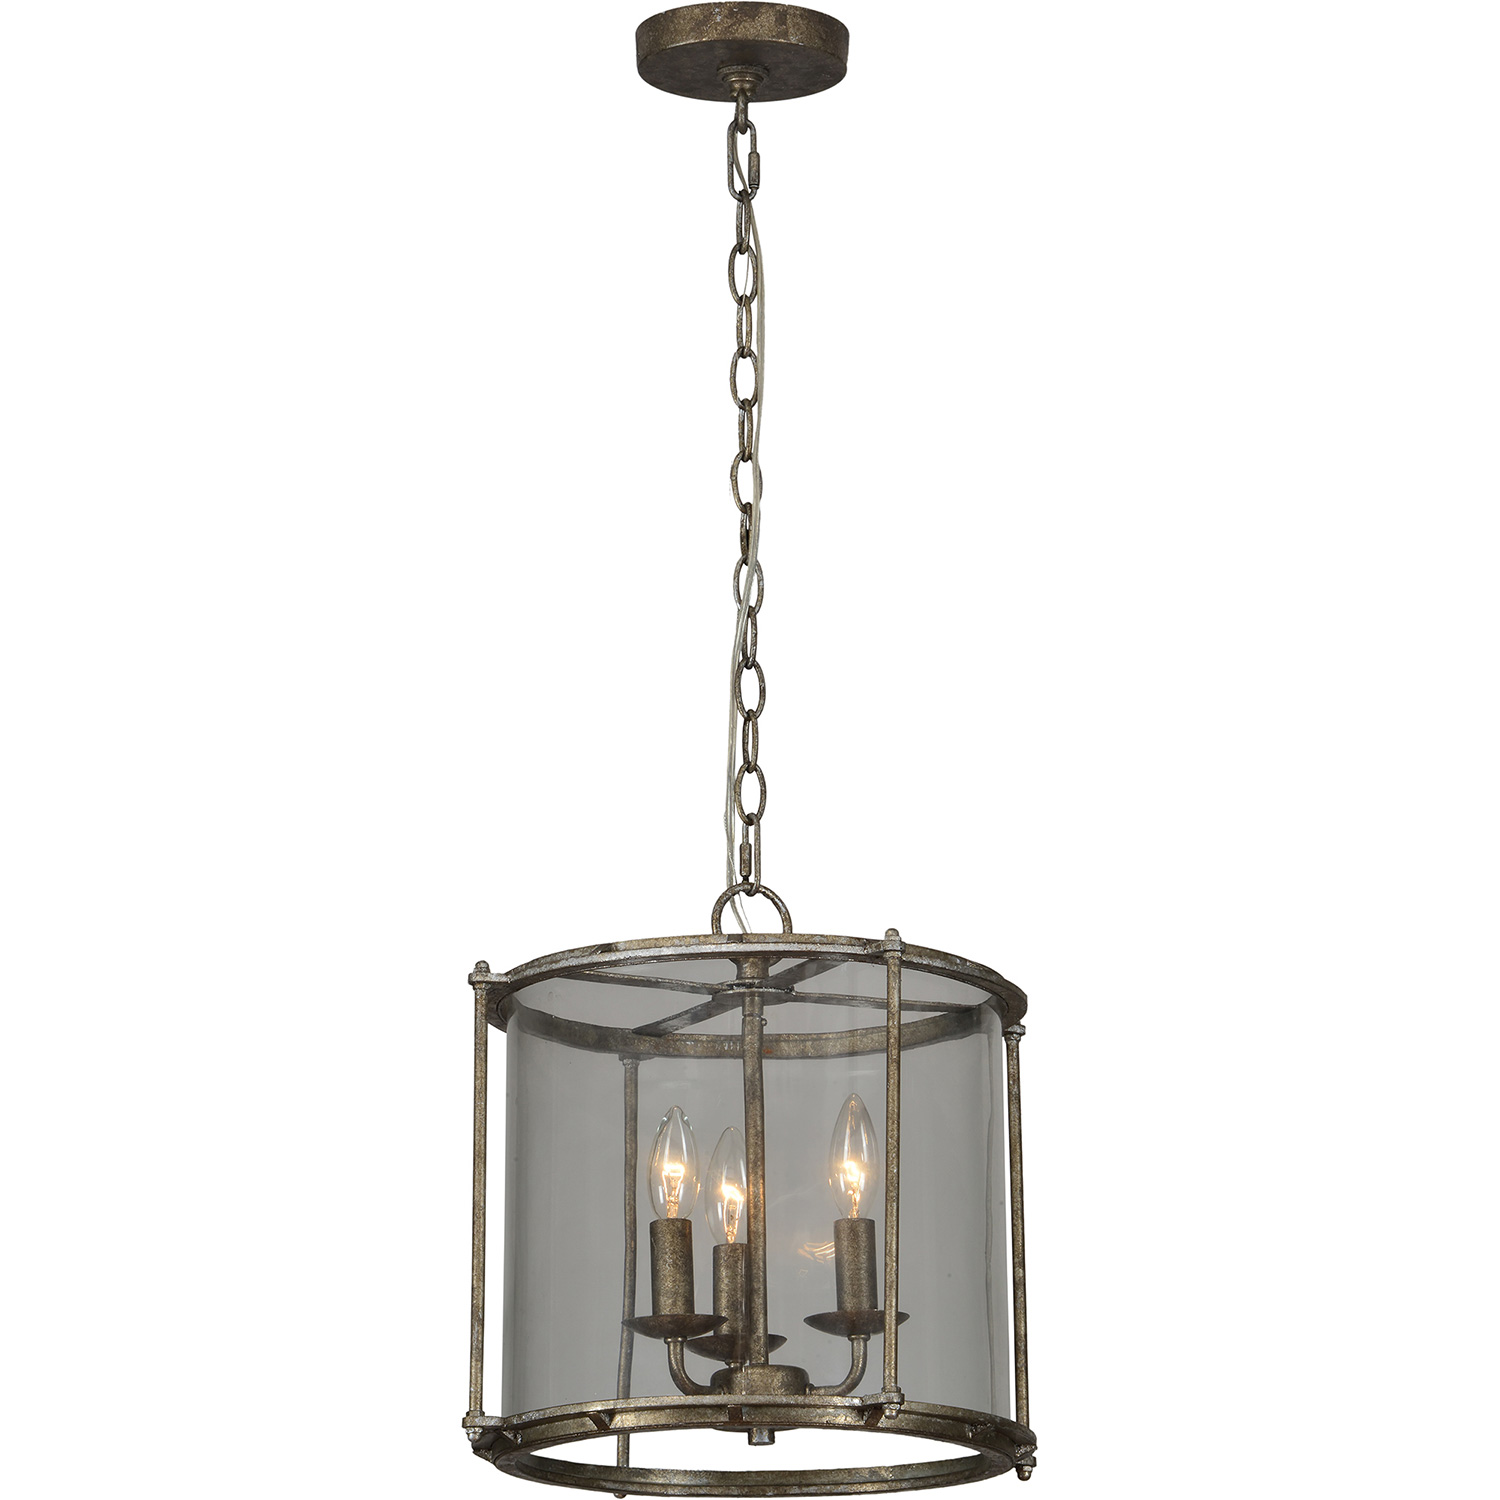 Ren-Wil Browning Ceiling Fixture - Rustic Silver/Clear